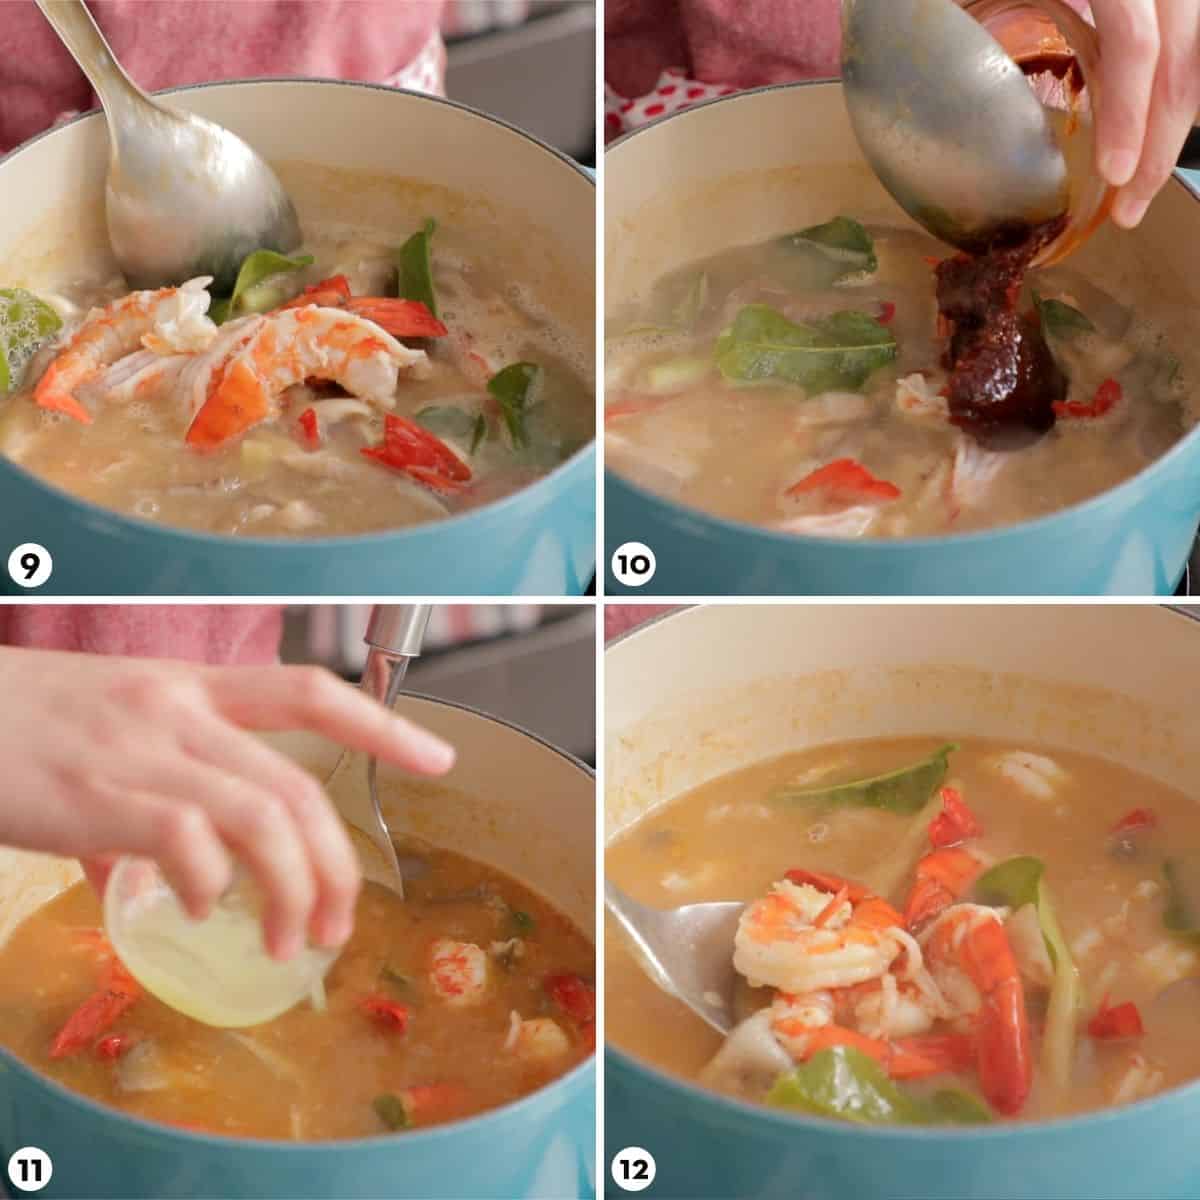 Process shot for how to make tom yum steps 9-12